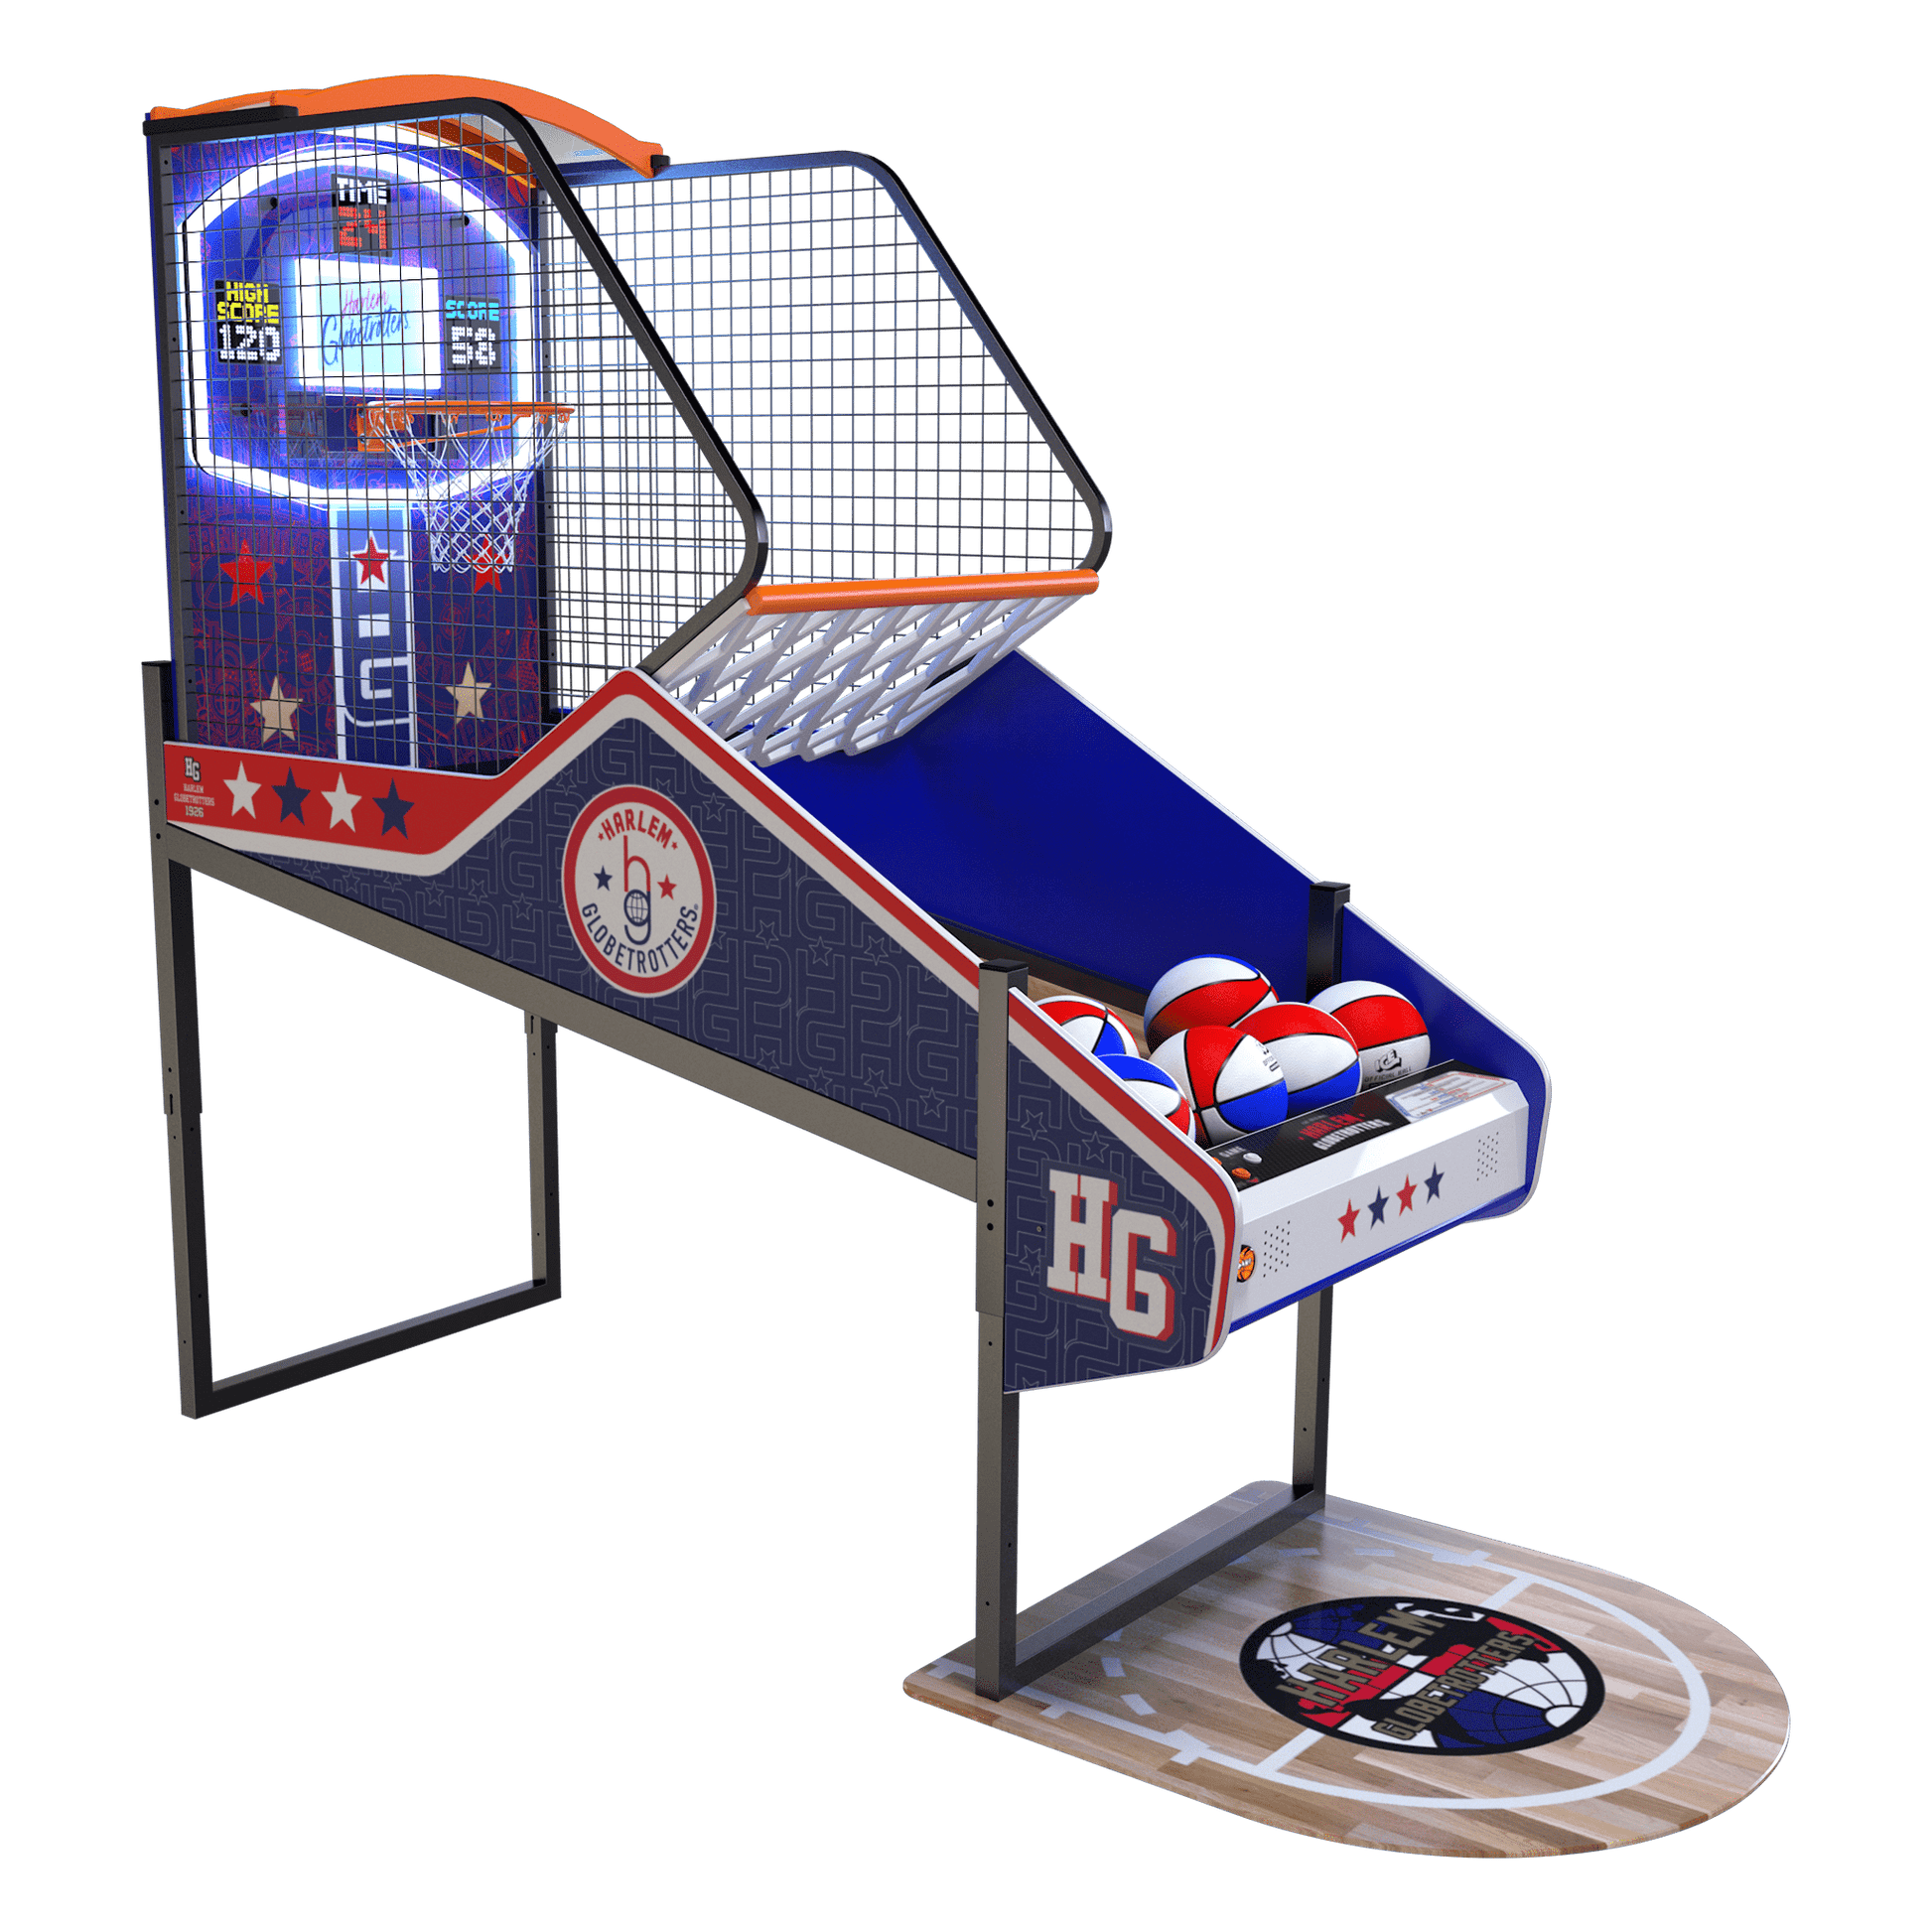 Harlem Globetrotters "Classic" Game time Pro with Floor Mat  Innovative Concepts in Entertainment, Inc.   